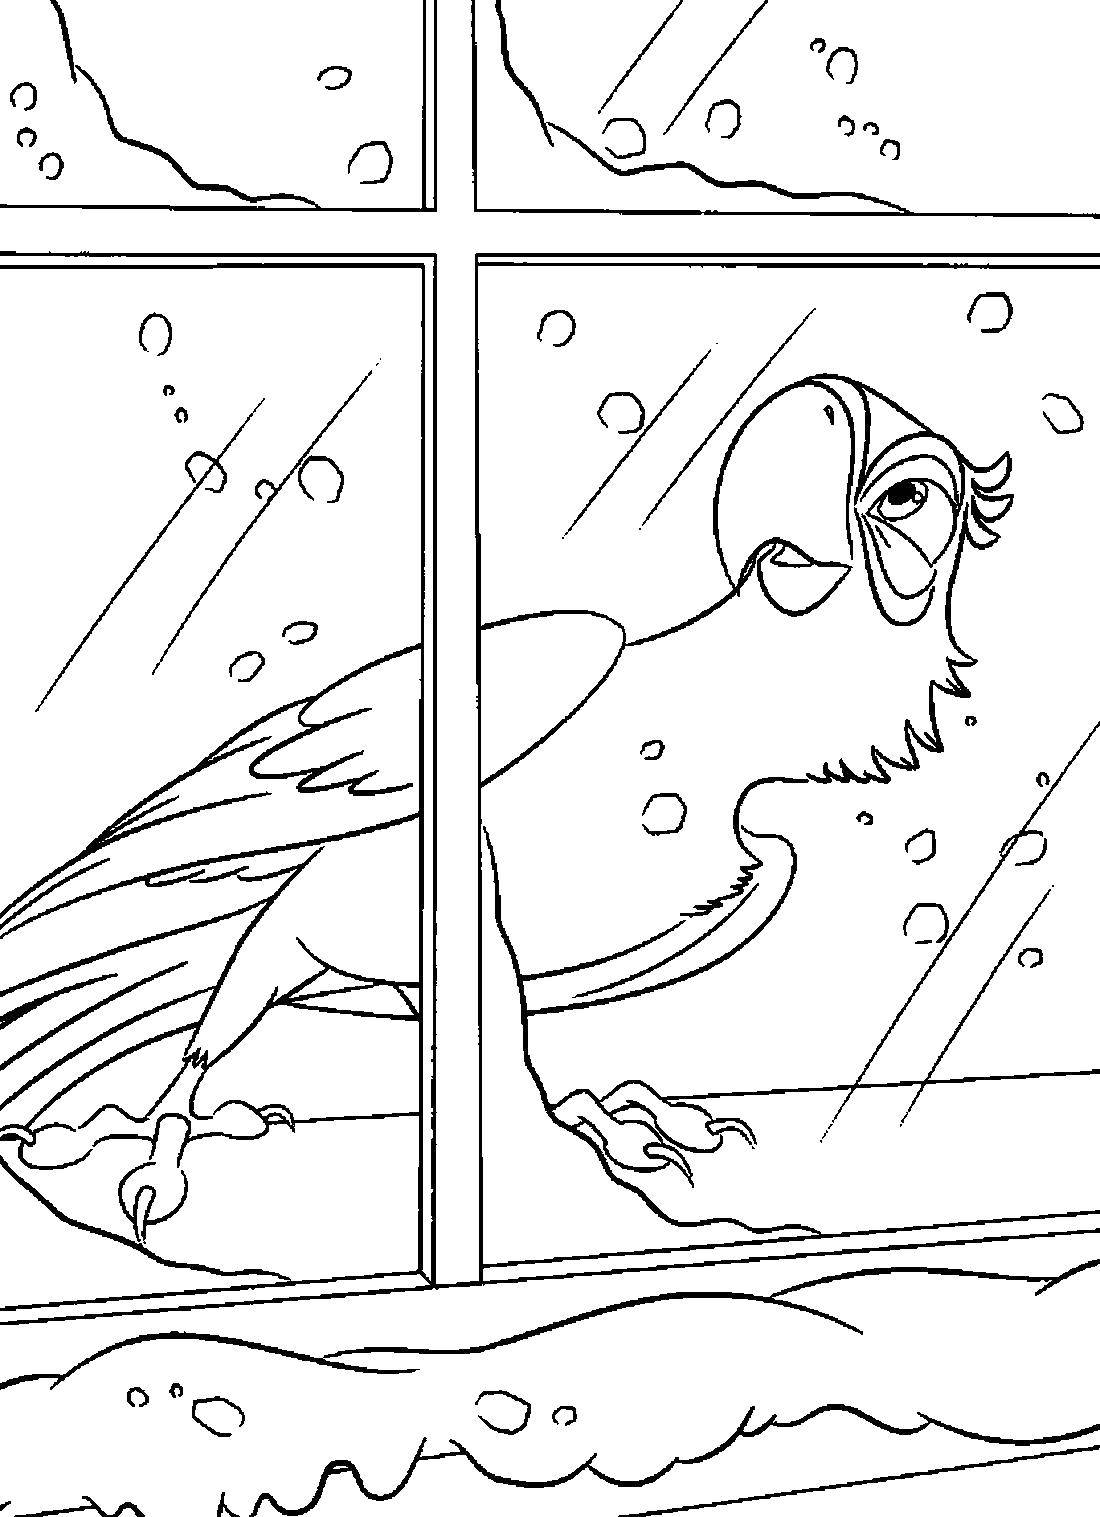 Coloring A parrot at a window. Category birds. Tags:  Birds, parrot.